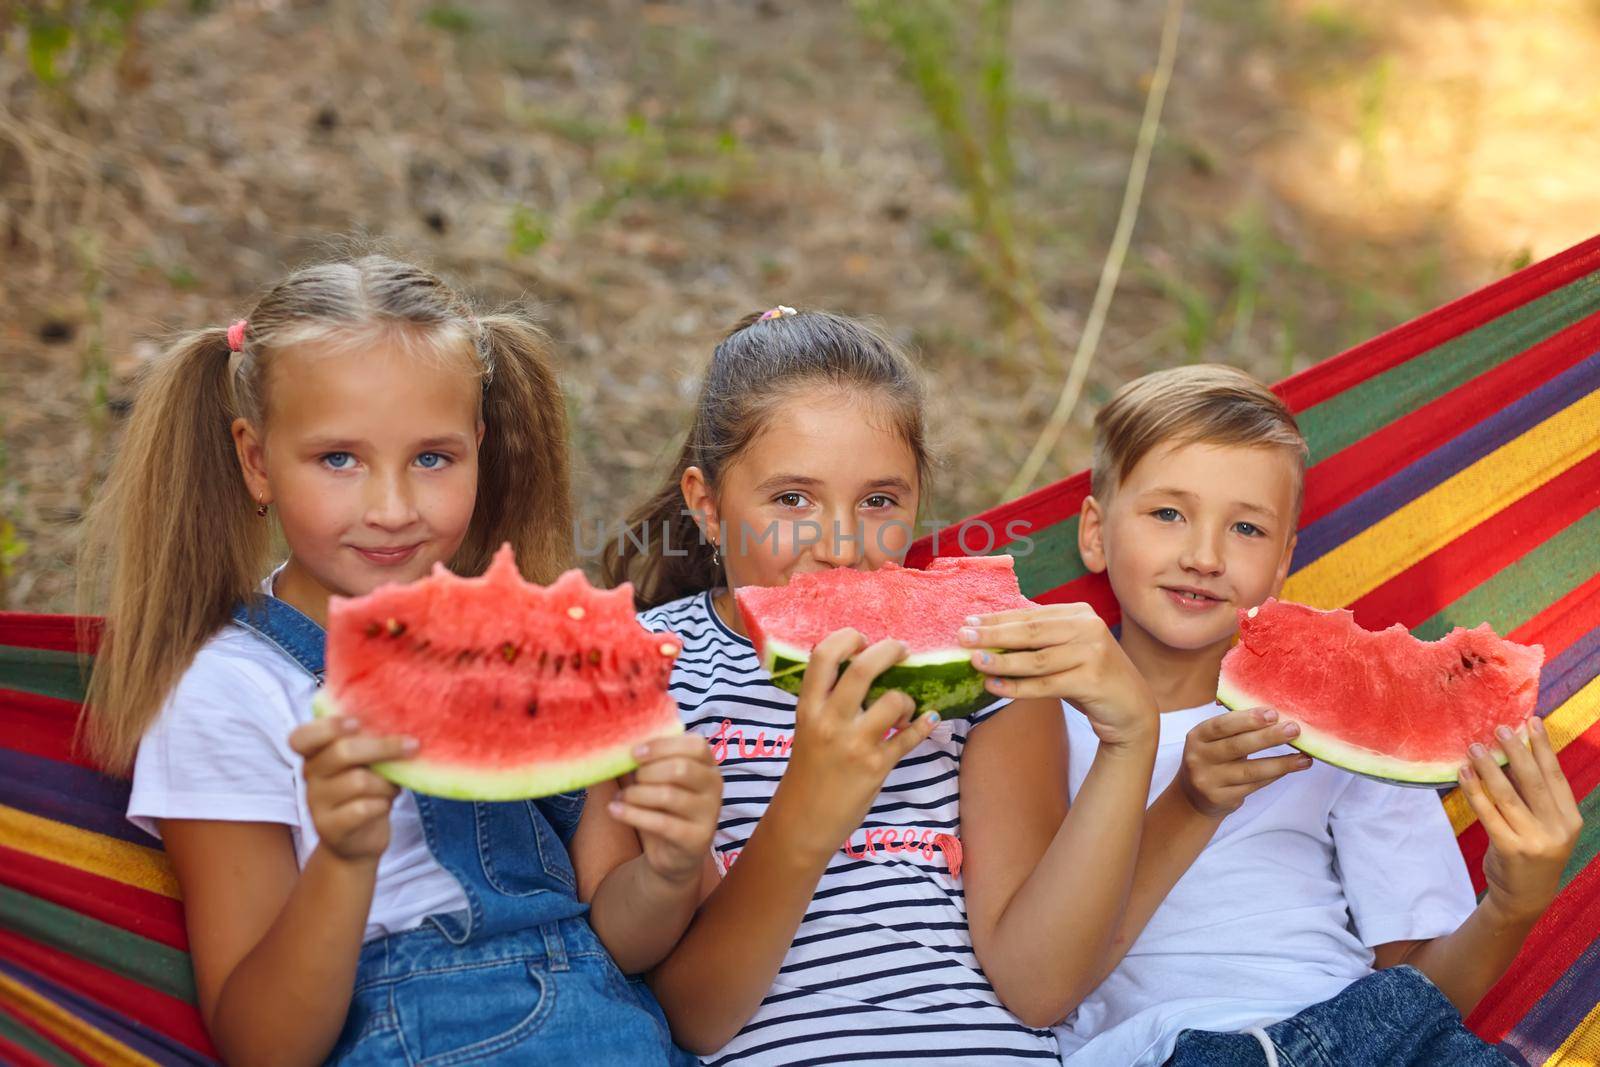 three cheerful children eat watermelon and joke, outdoor, sitting on a colorful hammock. Summer fun and leisure